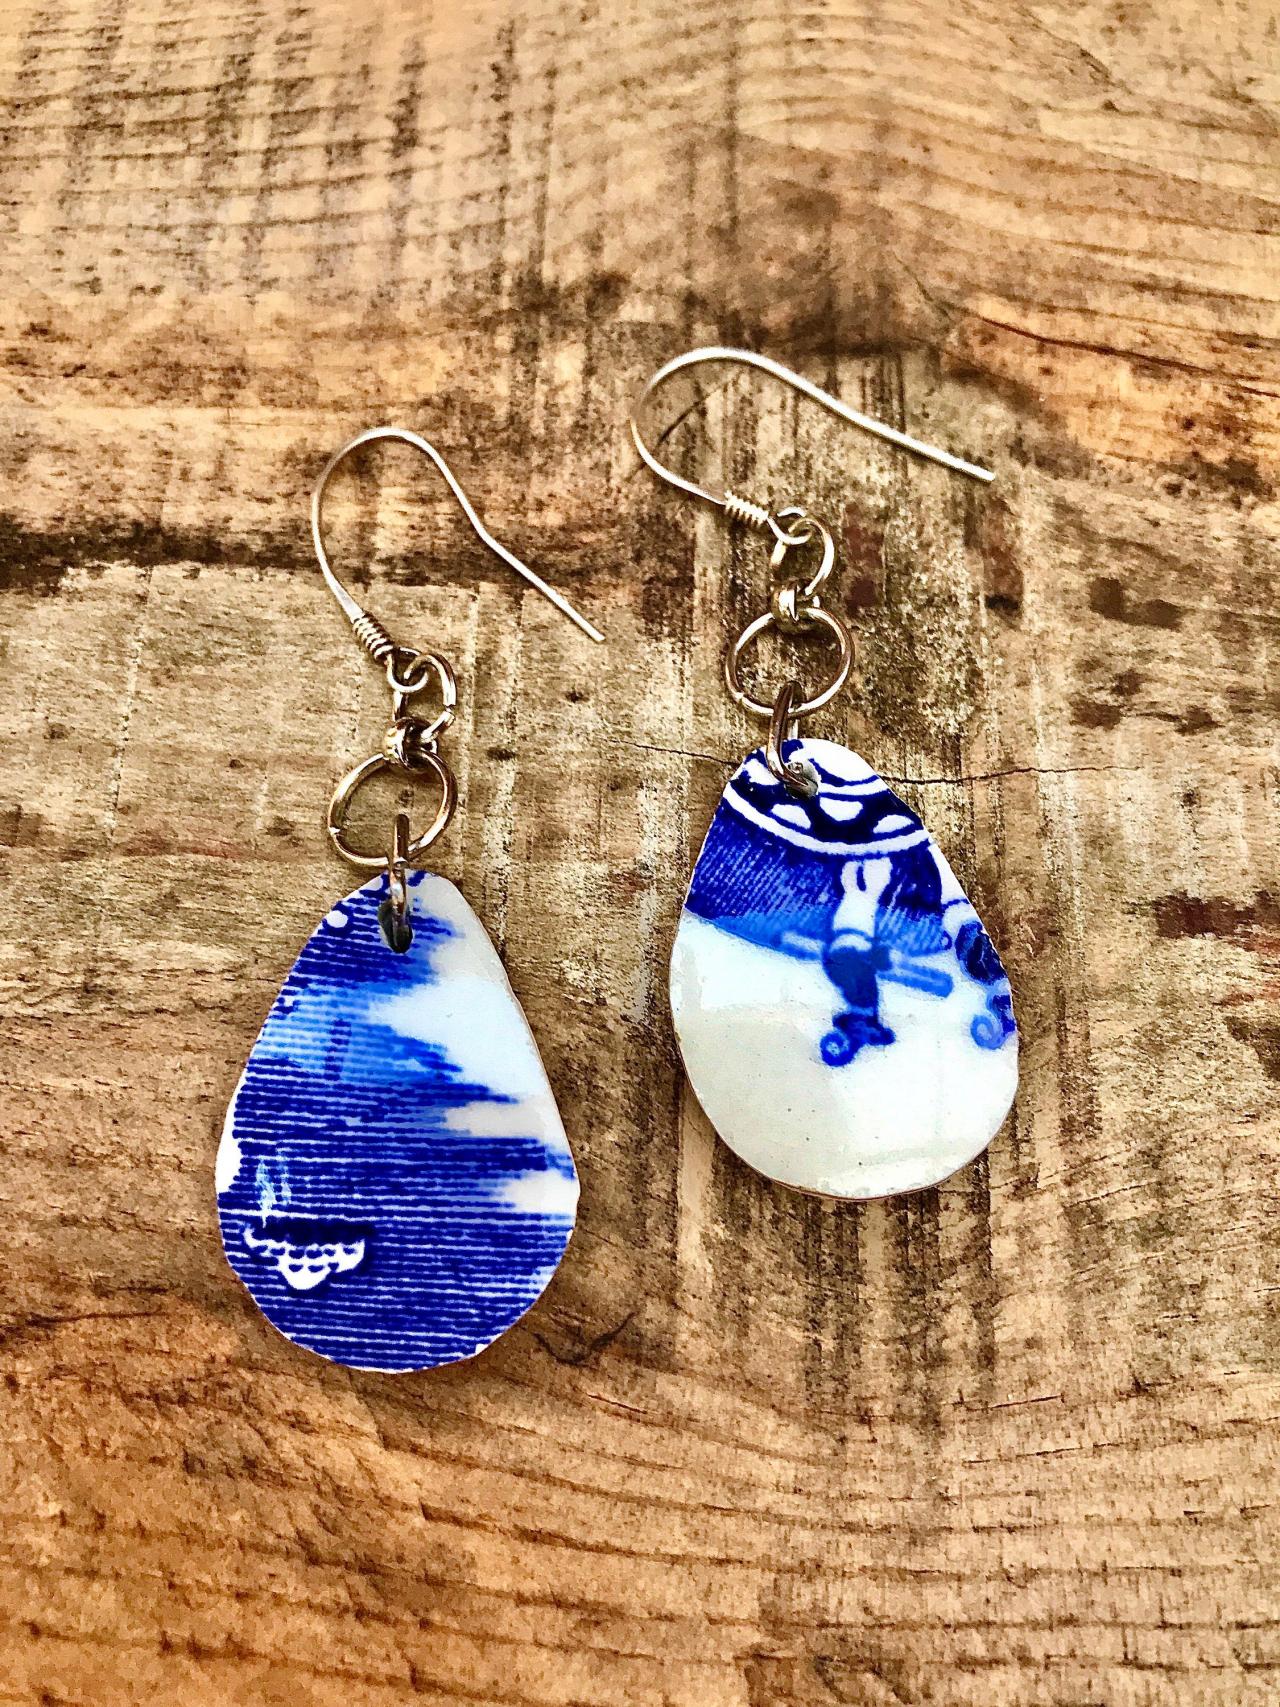 Sweet Vintage Willow Pattern Blue & White China Earrings.